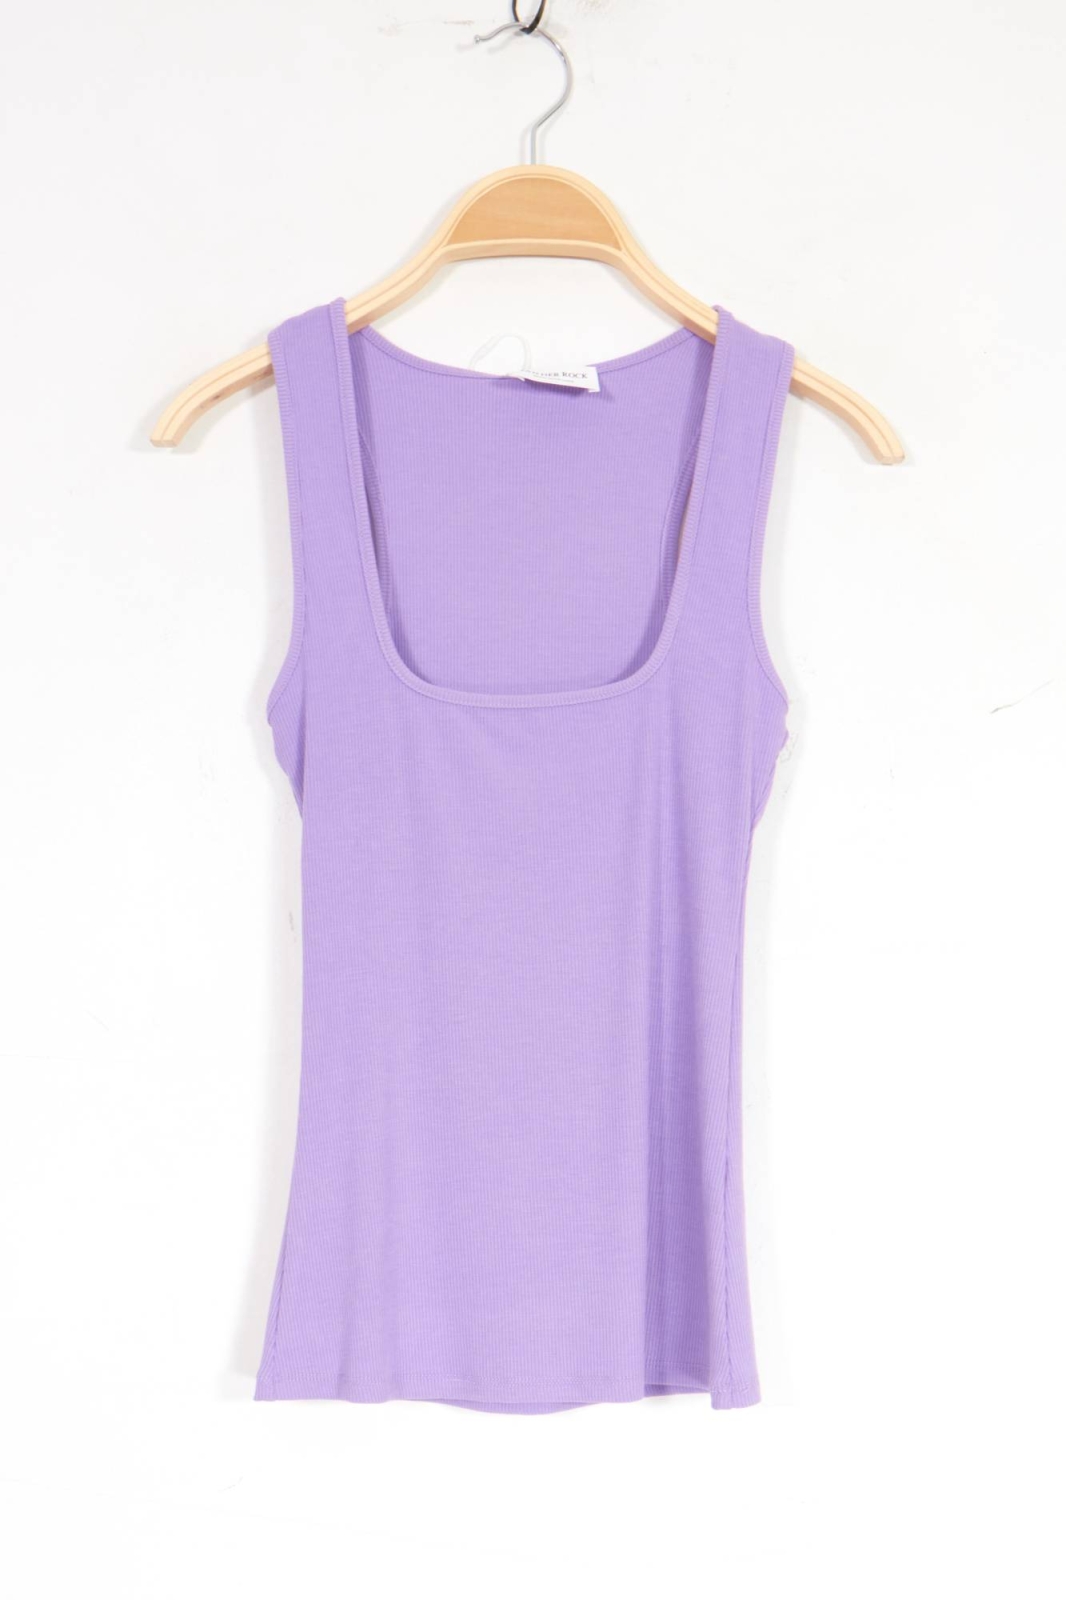 Racer Back Top - Lilac